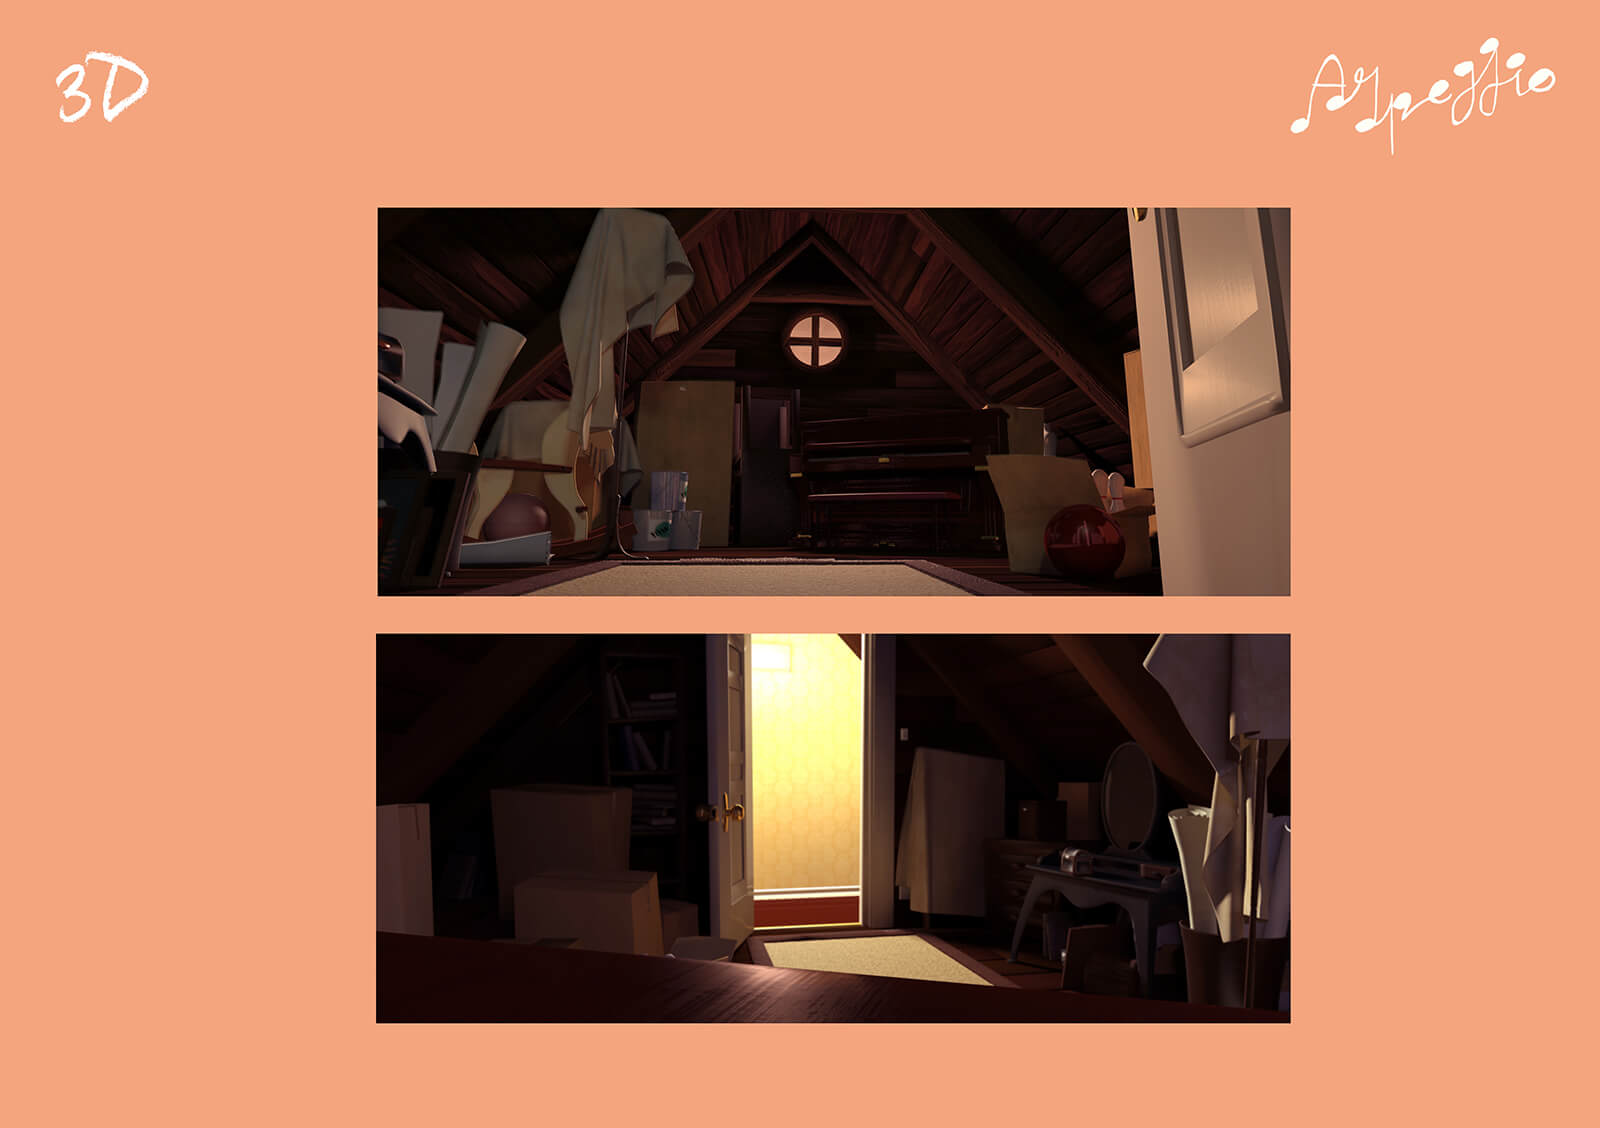 3D modeling of the attic setting in the film Arpeggio, depicting the view from the room door as well as from the far side